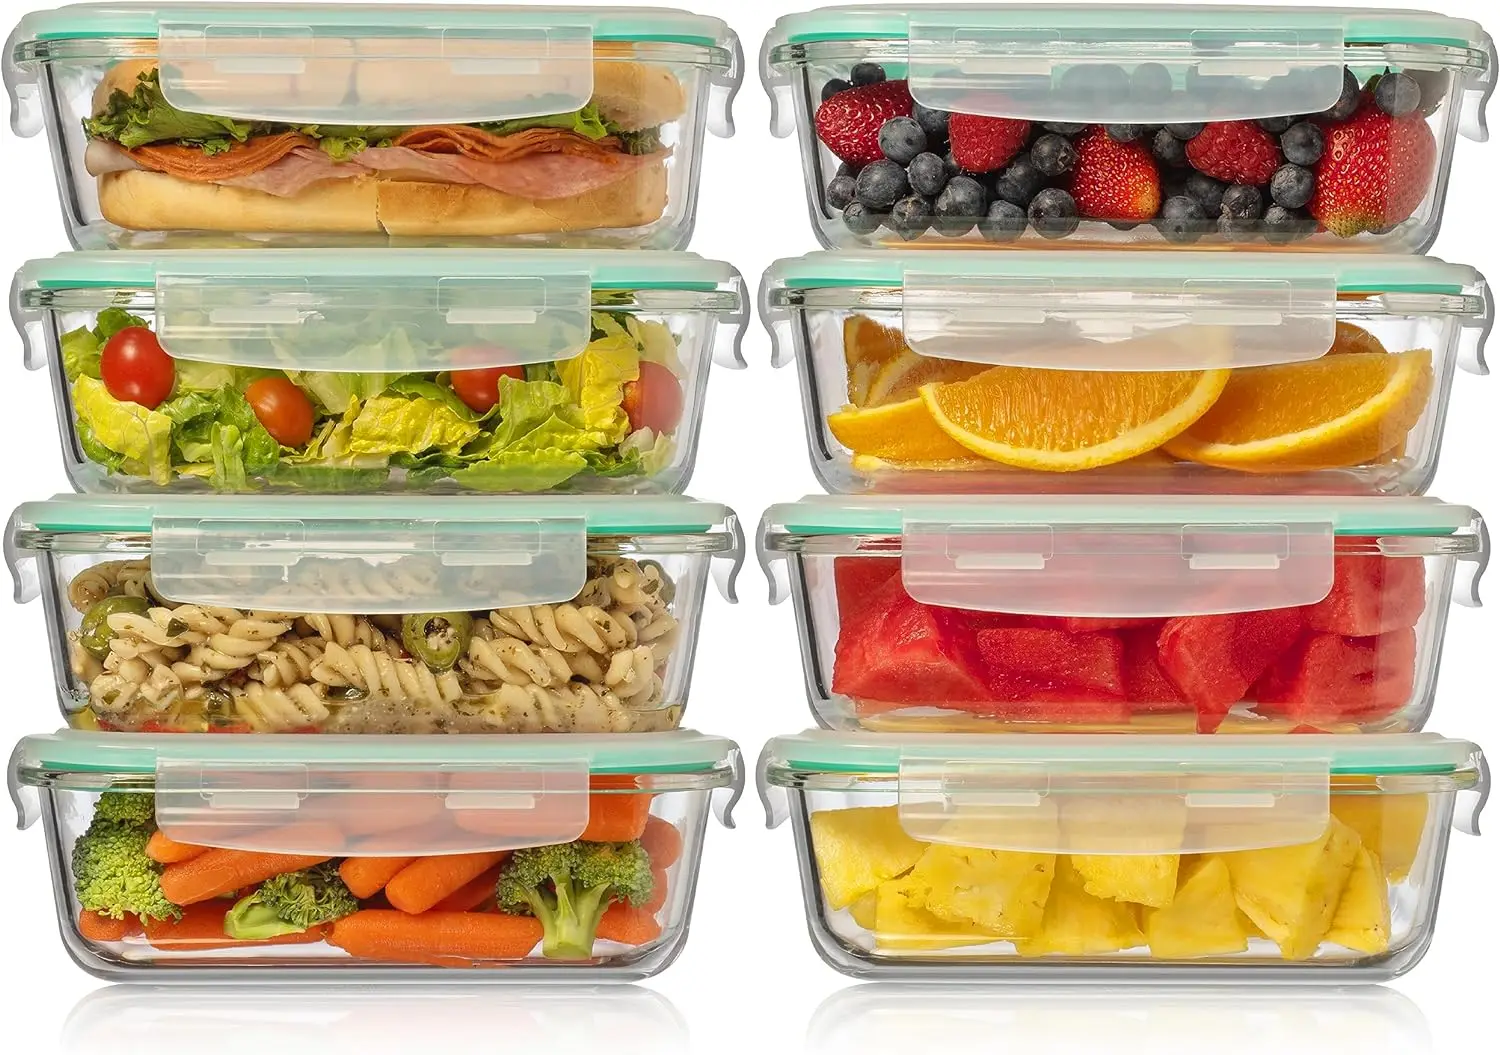 

35oz Same Size Glass Food Storage Containers with Lids - Airtight, Leakproof, Oven, Microwave & Freezer Safe, Stain & Od Jar lid